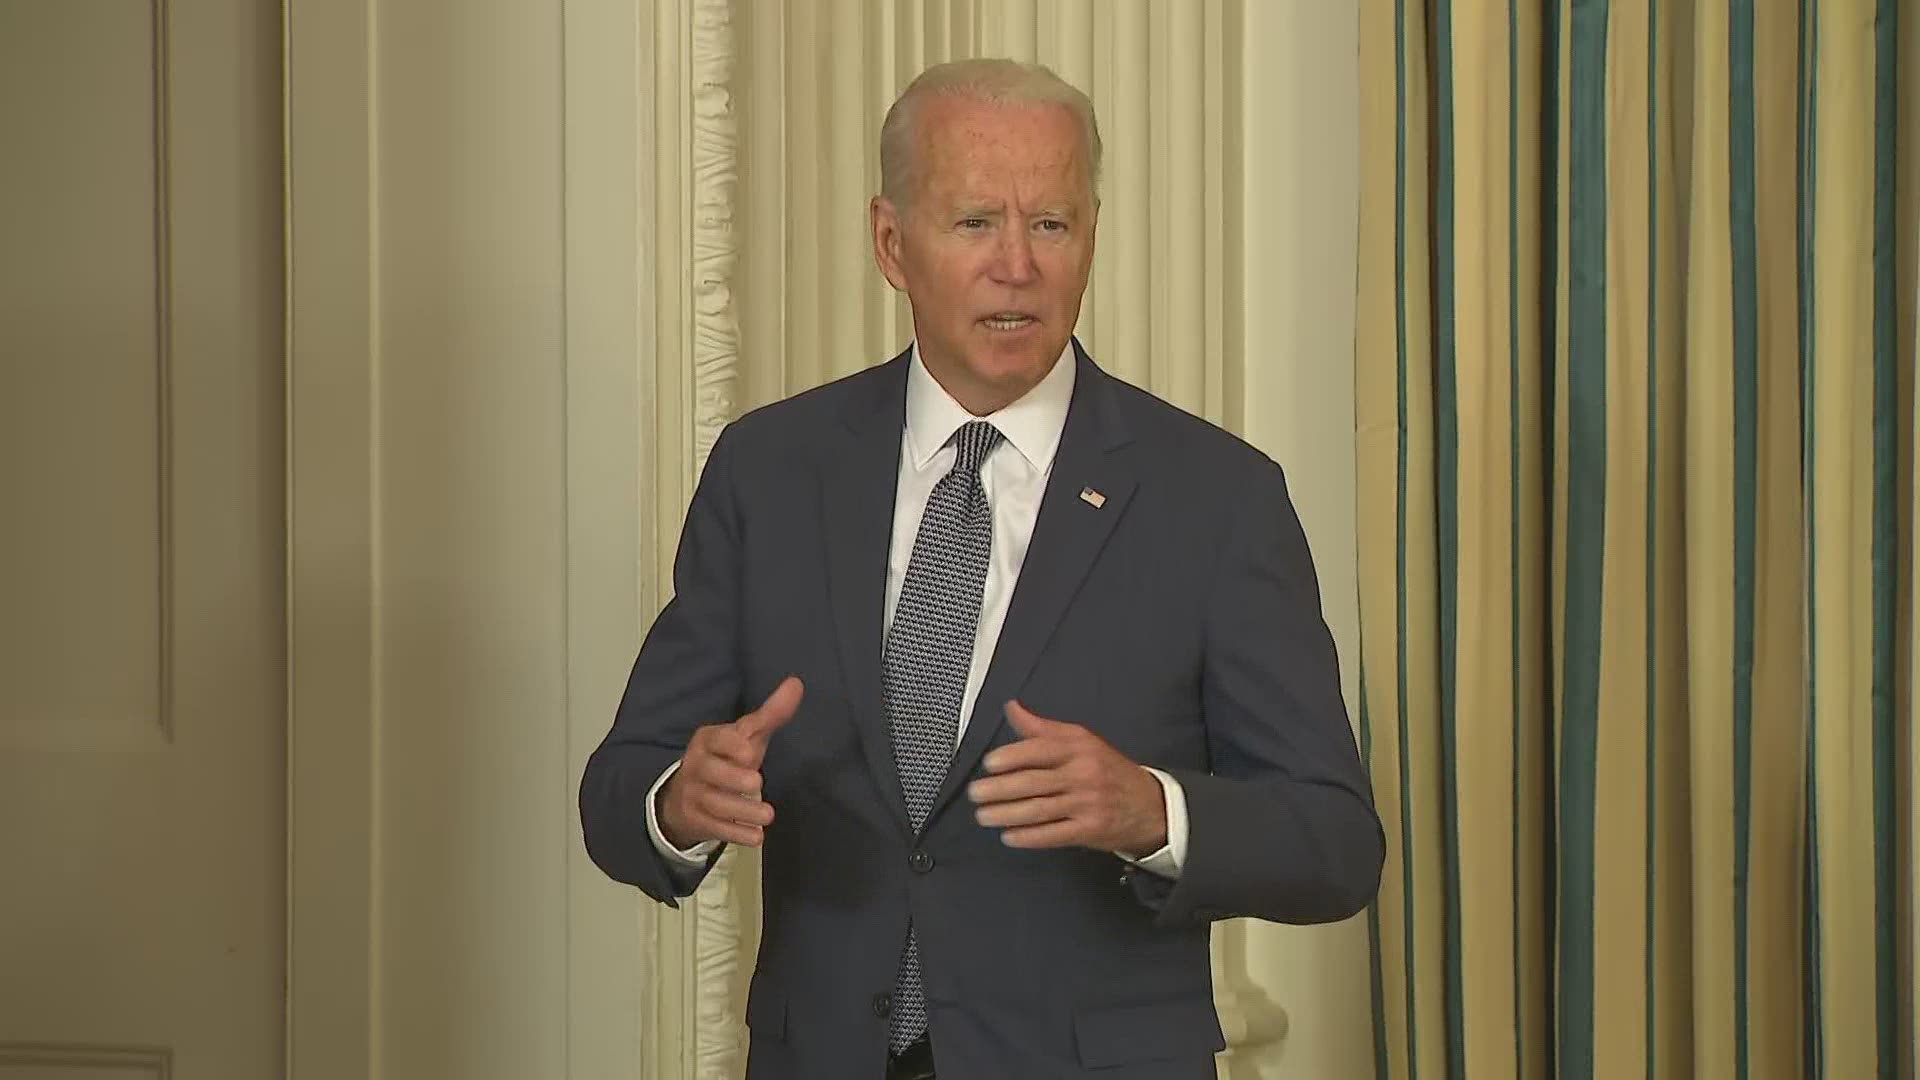 President Biden said he made clear to Putin that the U.S. expects when ransomware operations come from Russia, they expect Russia to act on the perpetrators.